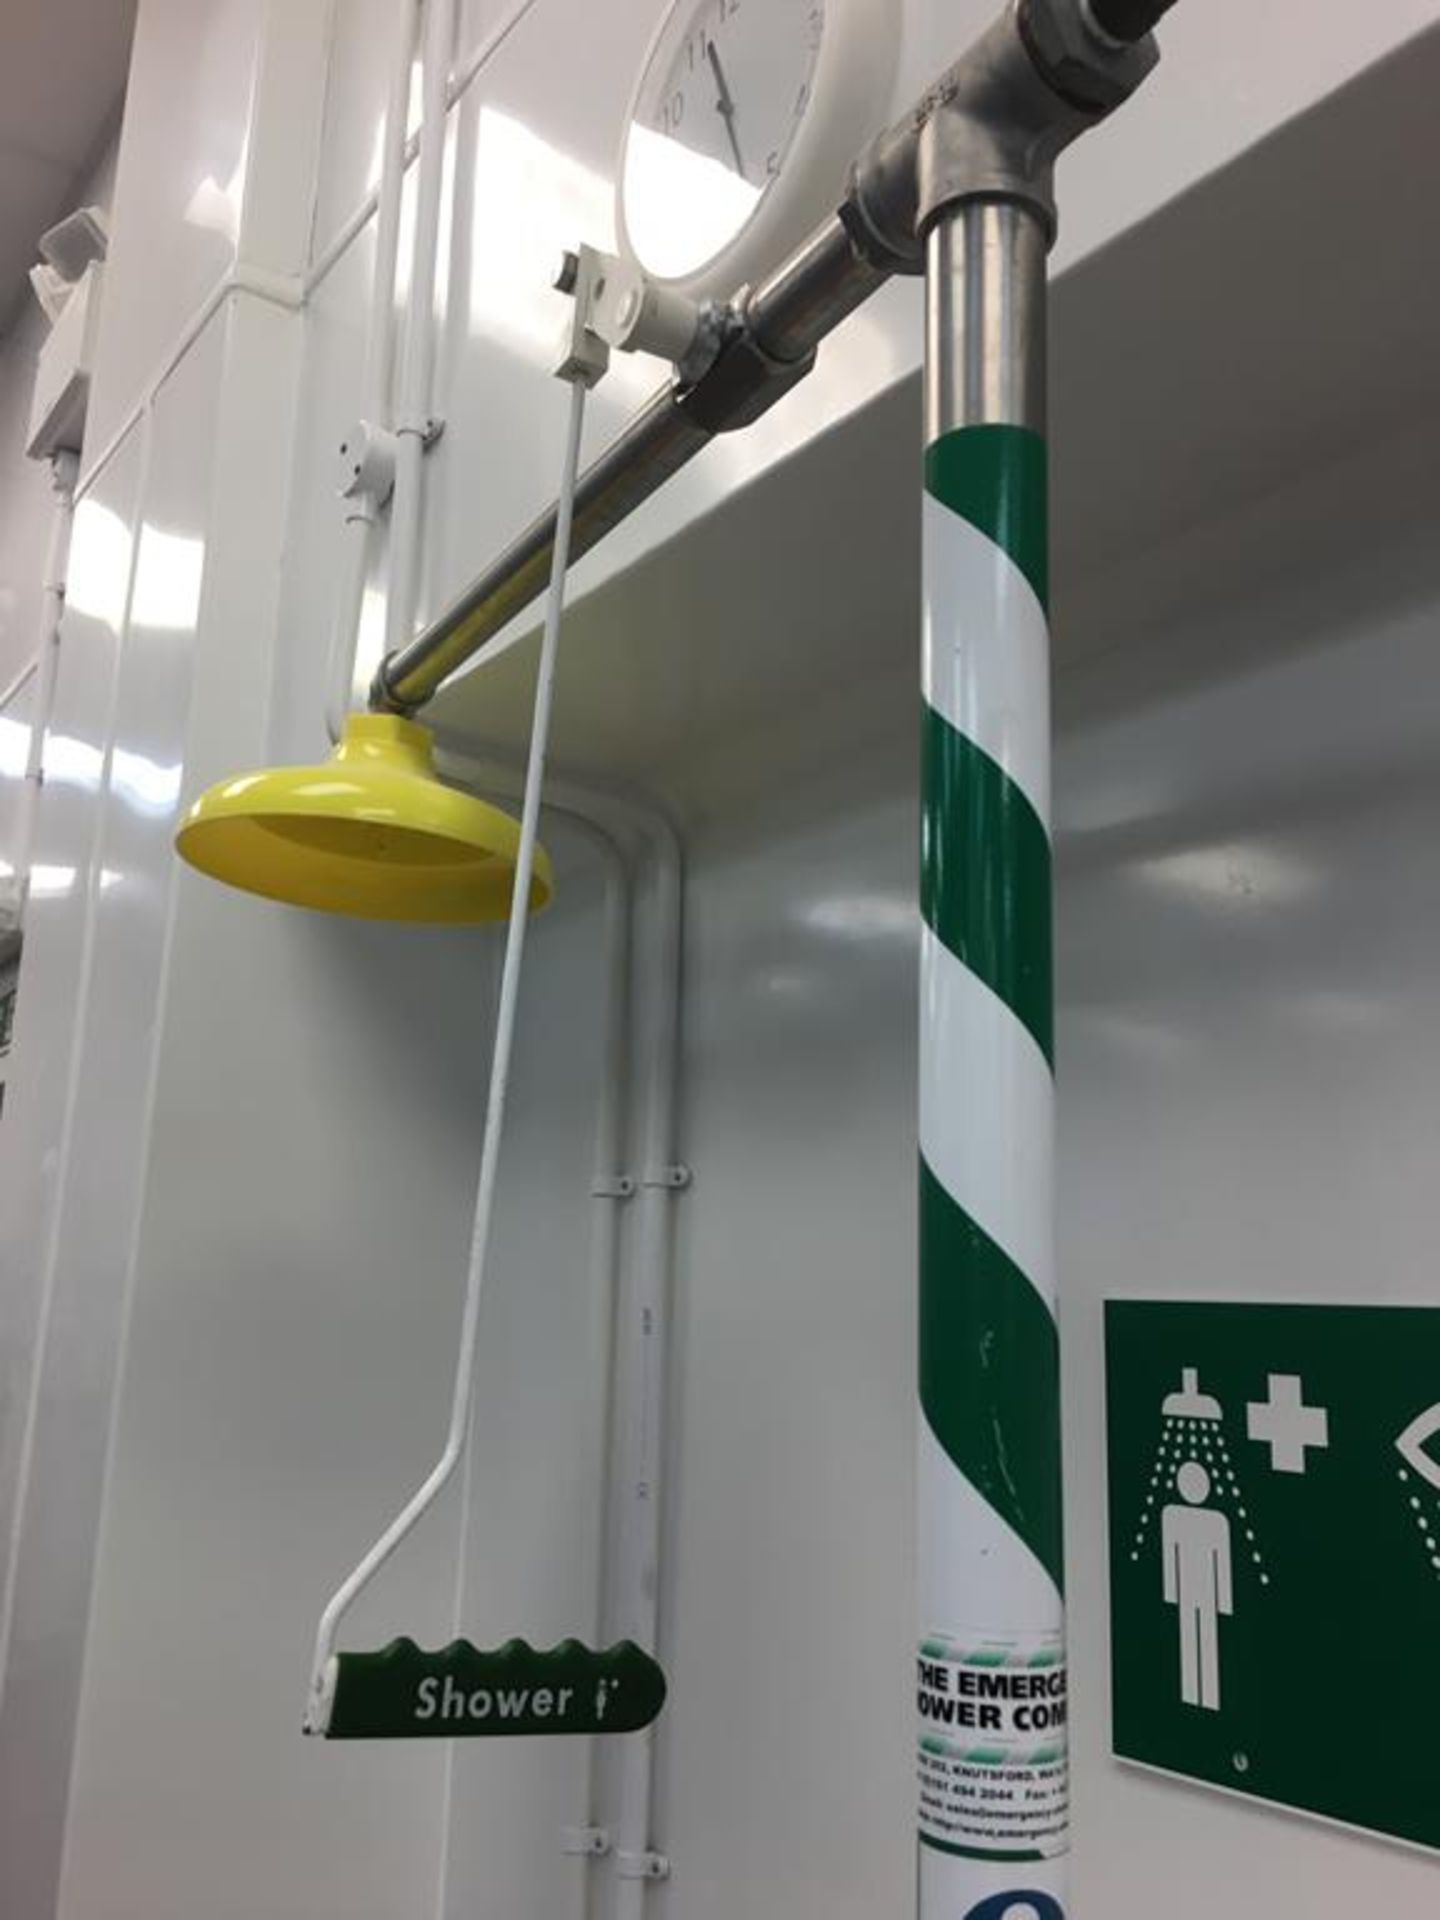 SS Floor standing safety shower with eye wash station - Image 5 of 5